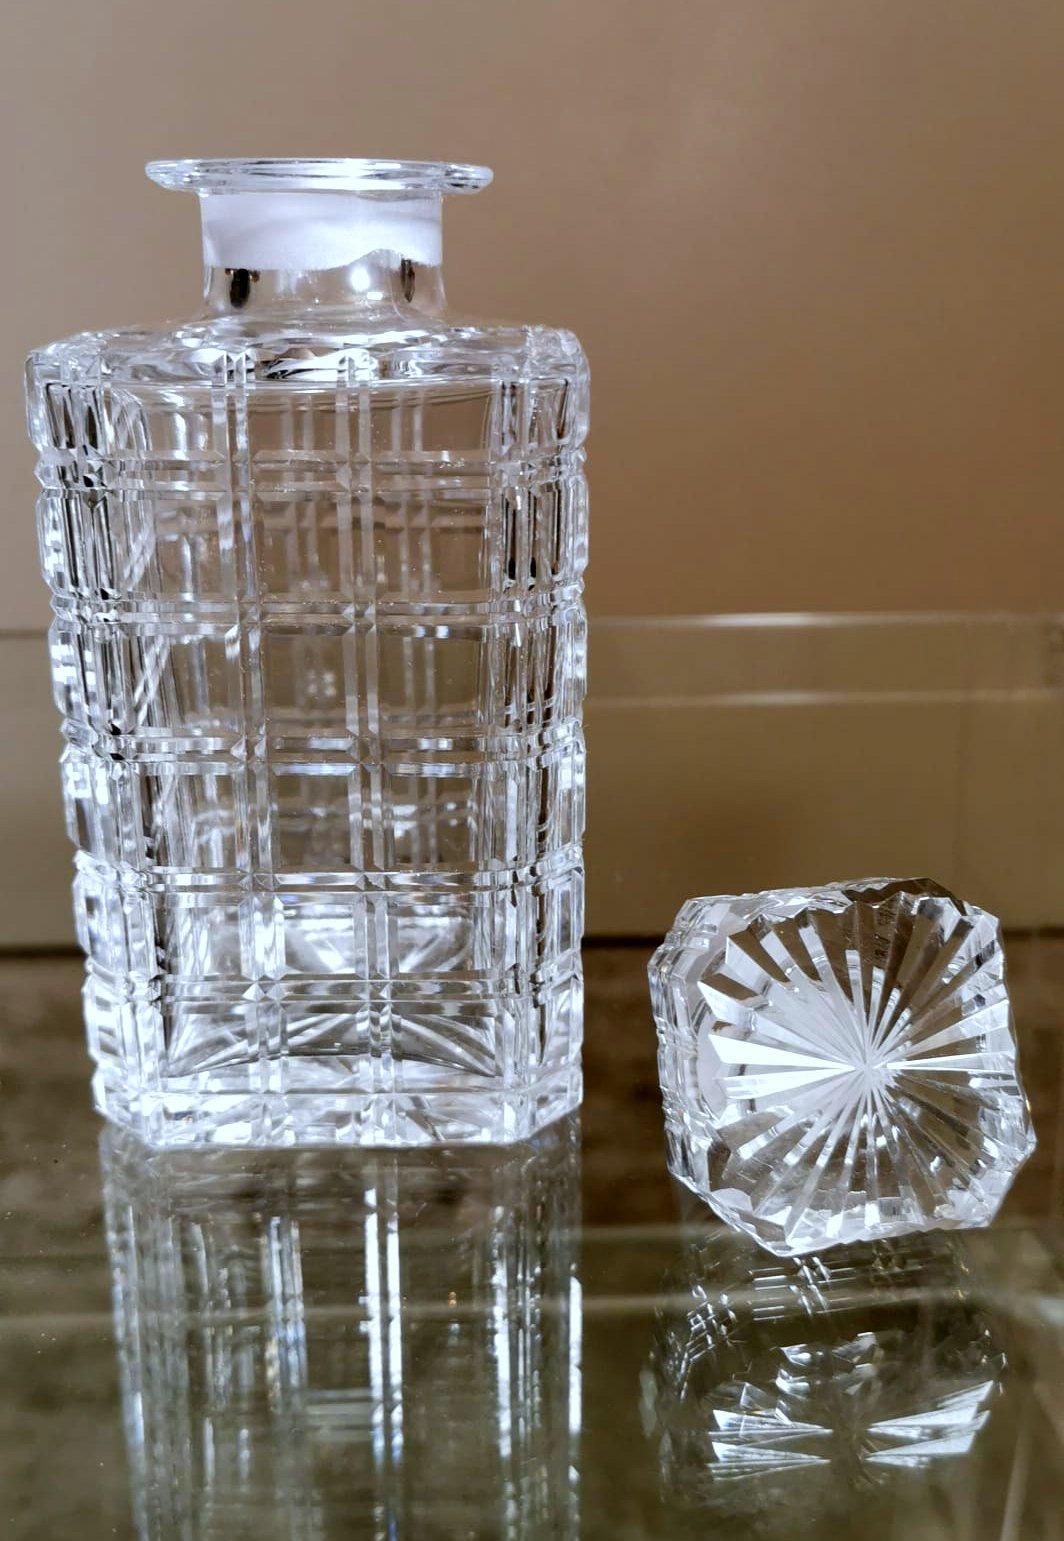 Hand-Crafted Florentine Handcrafted Crystal Bottle Ground, Cut And Polished By Hand